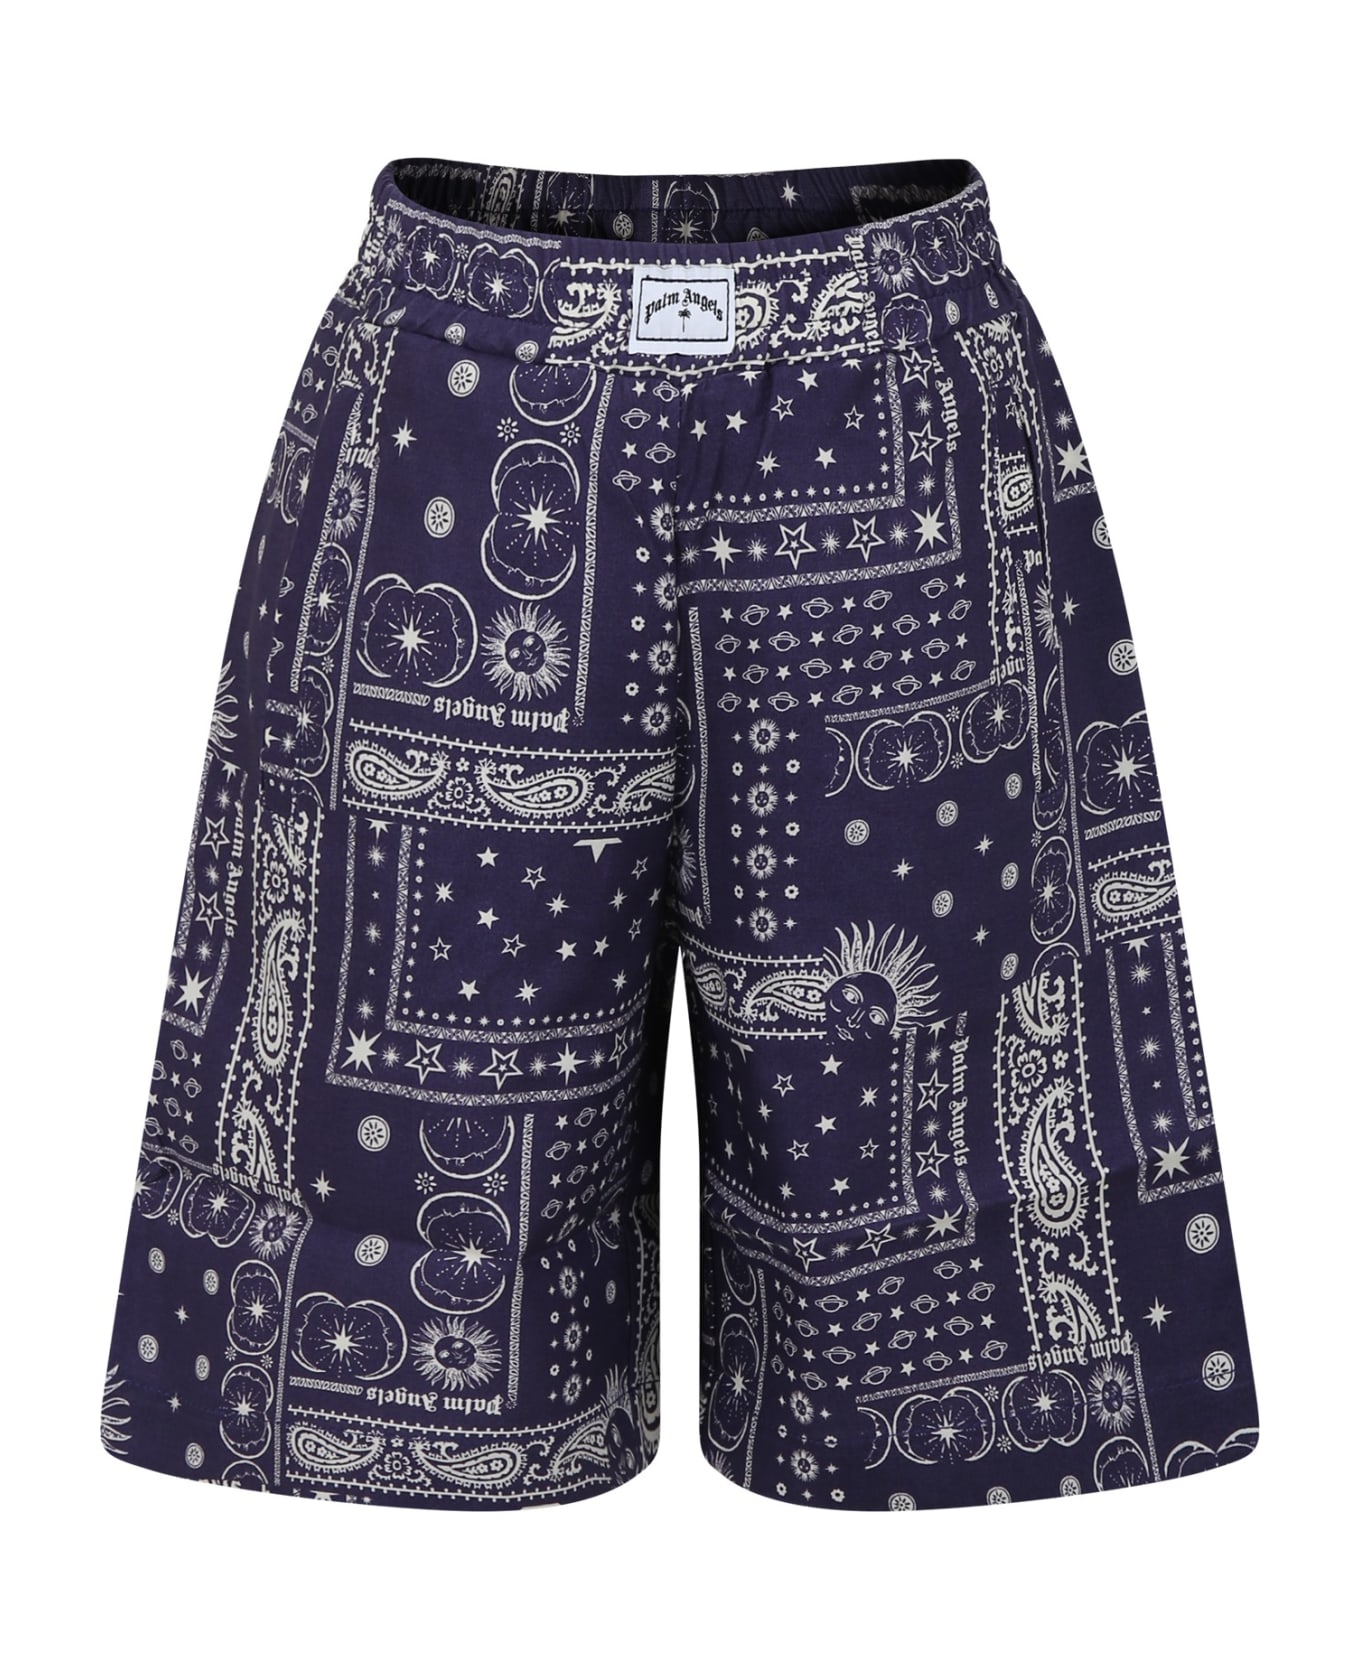 Palm Angels Blue Shorts For Boy With Print - BLUE/WHITE ボトムス